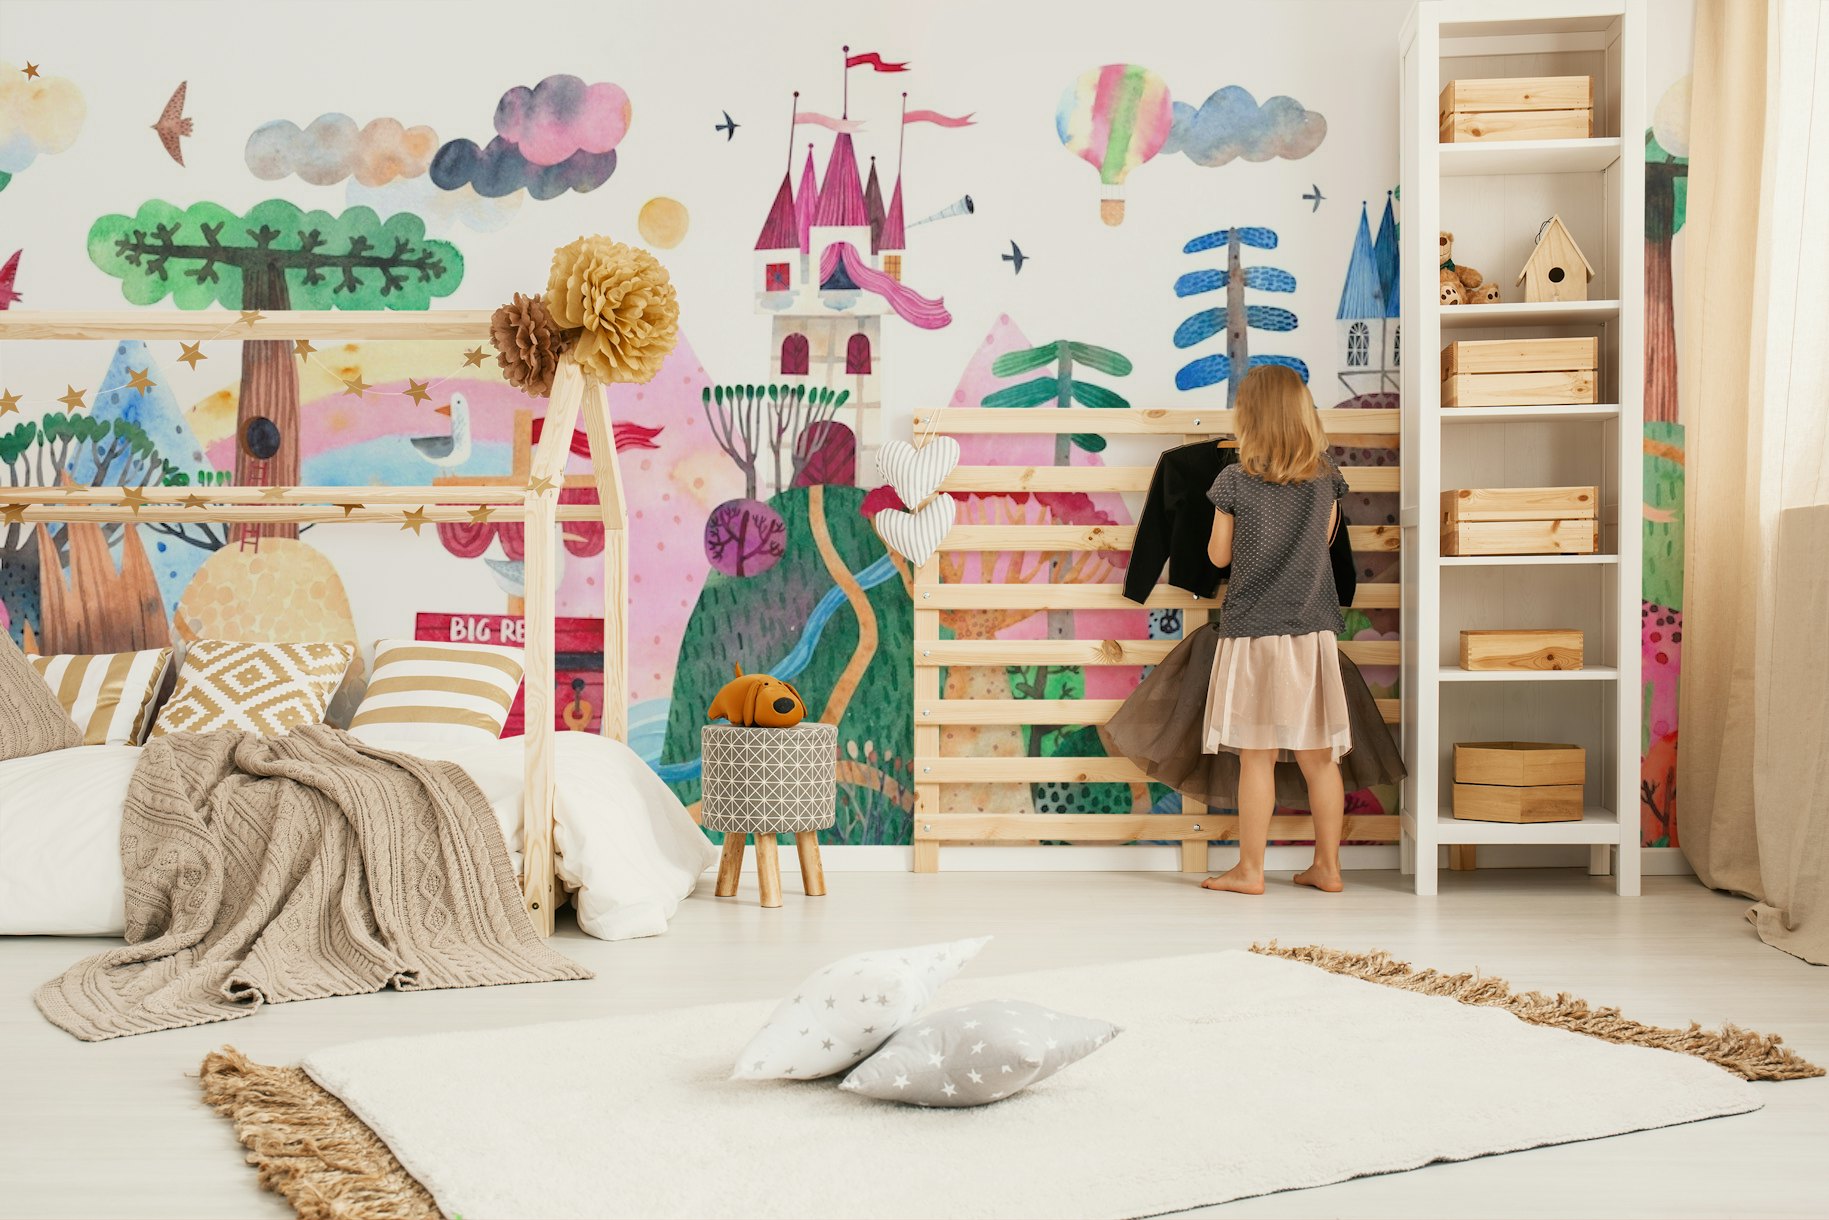 Charming Kids Wonderland wallpaper mural featuring clouds, castle, and animal friends